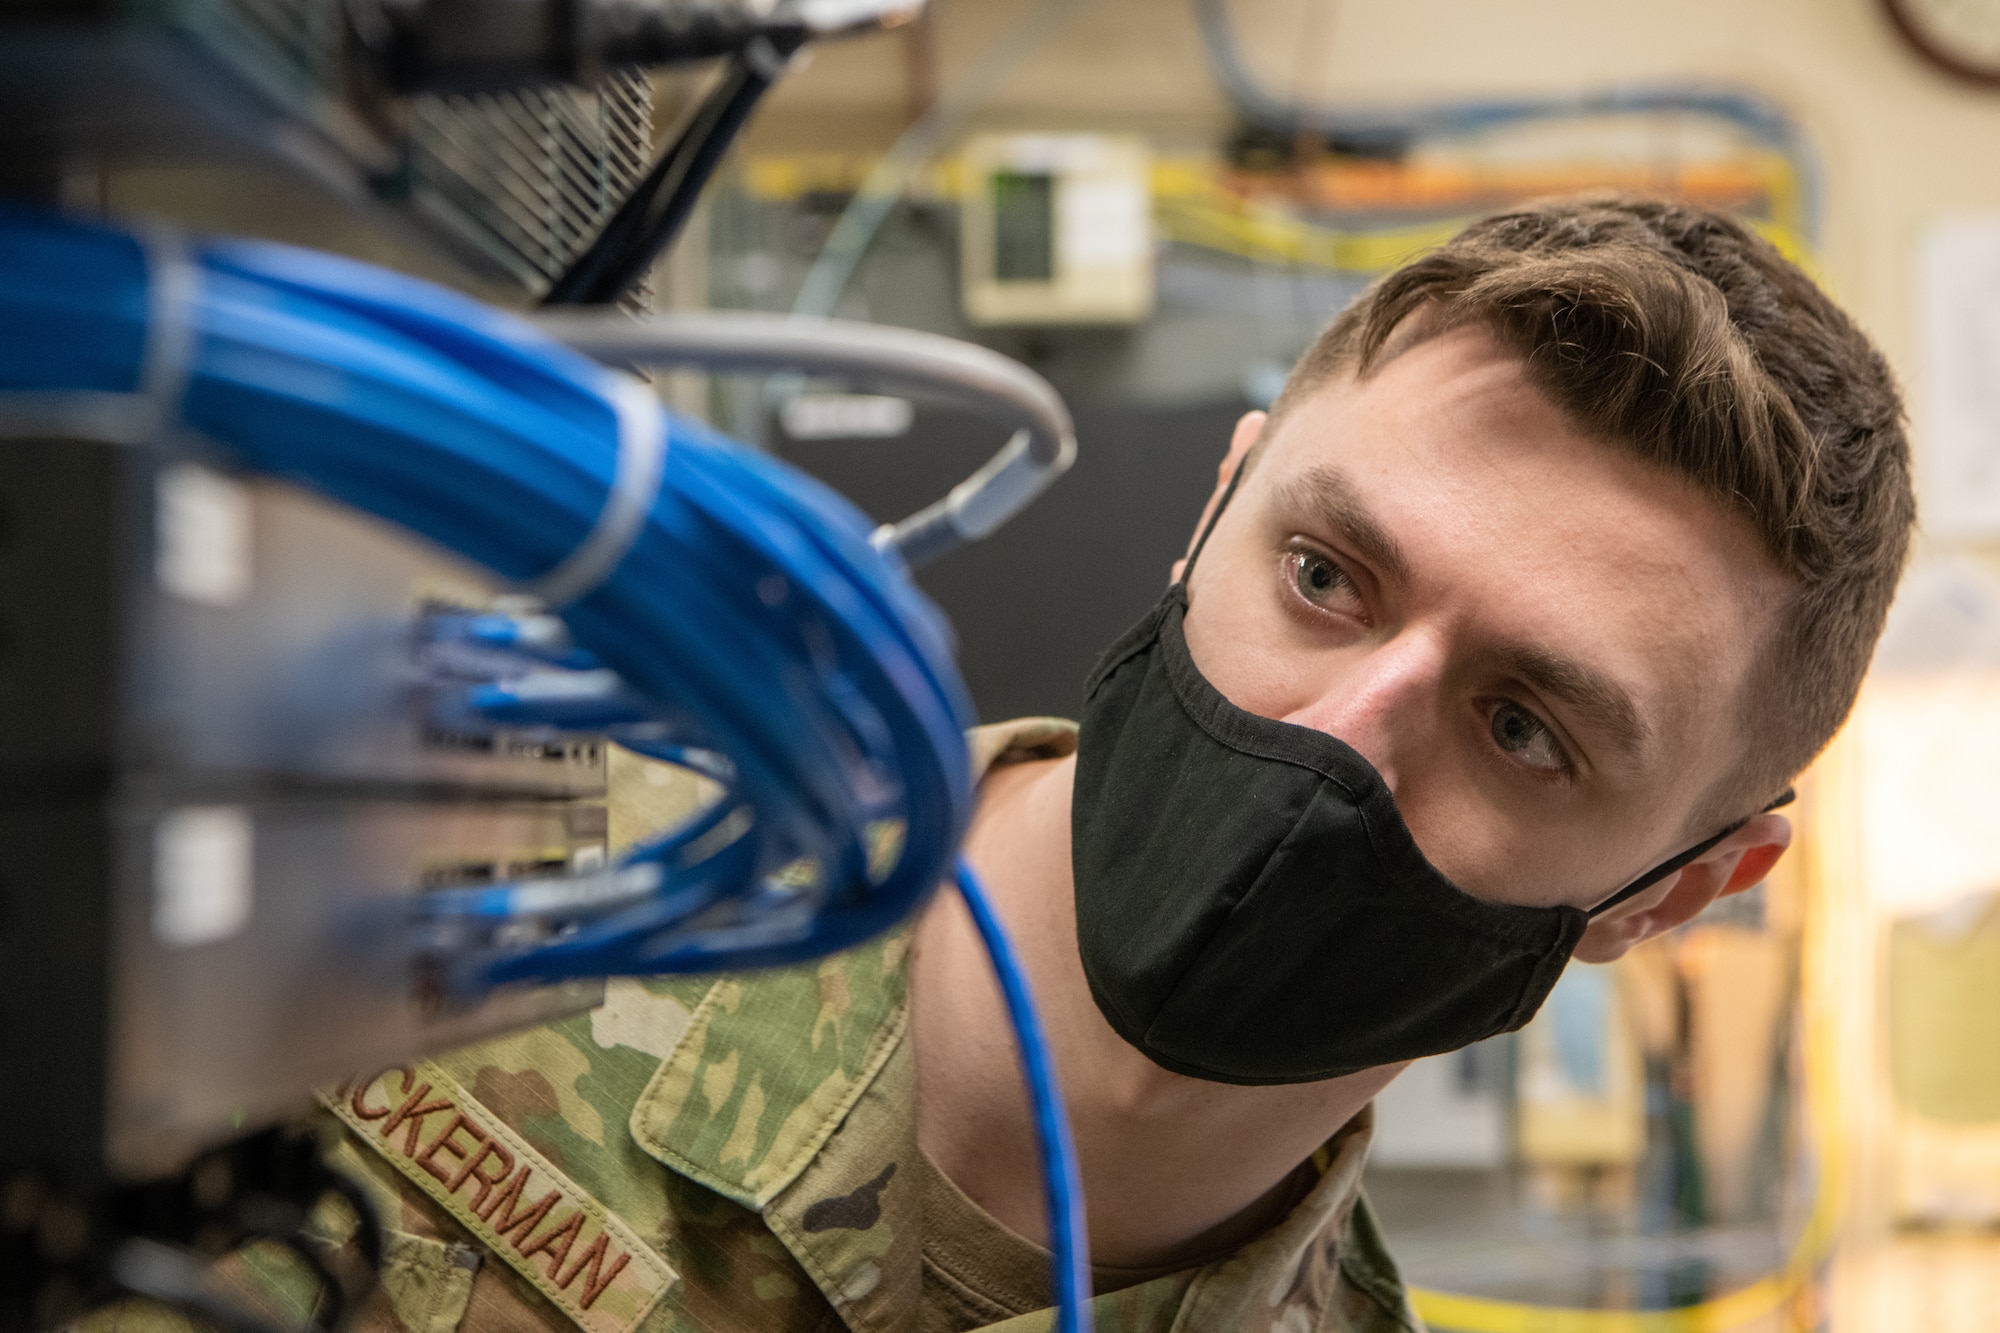 Senior Airman Samuel Ackerman, a 611th Air Communications Squadron Mission Defense Team operator, checks cable connections on the server tower.